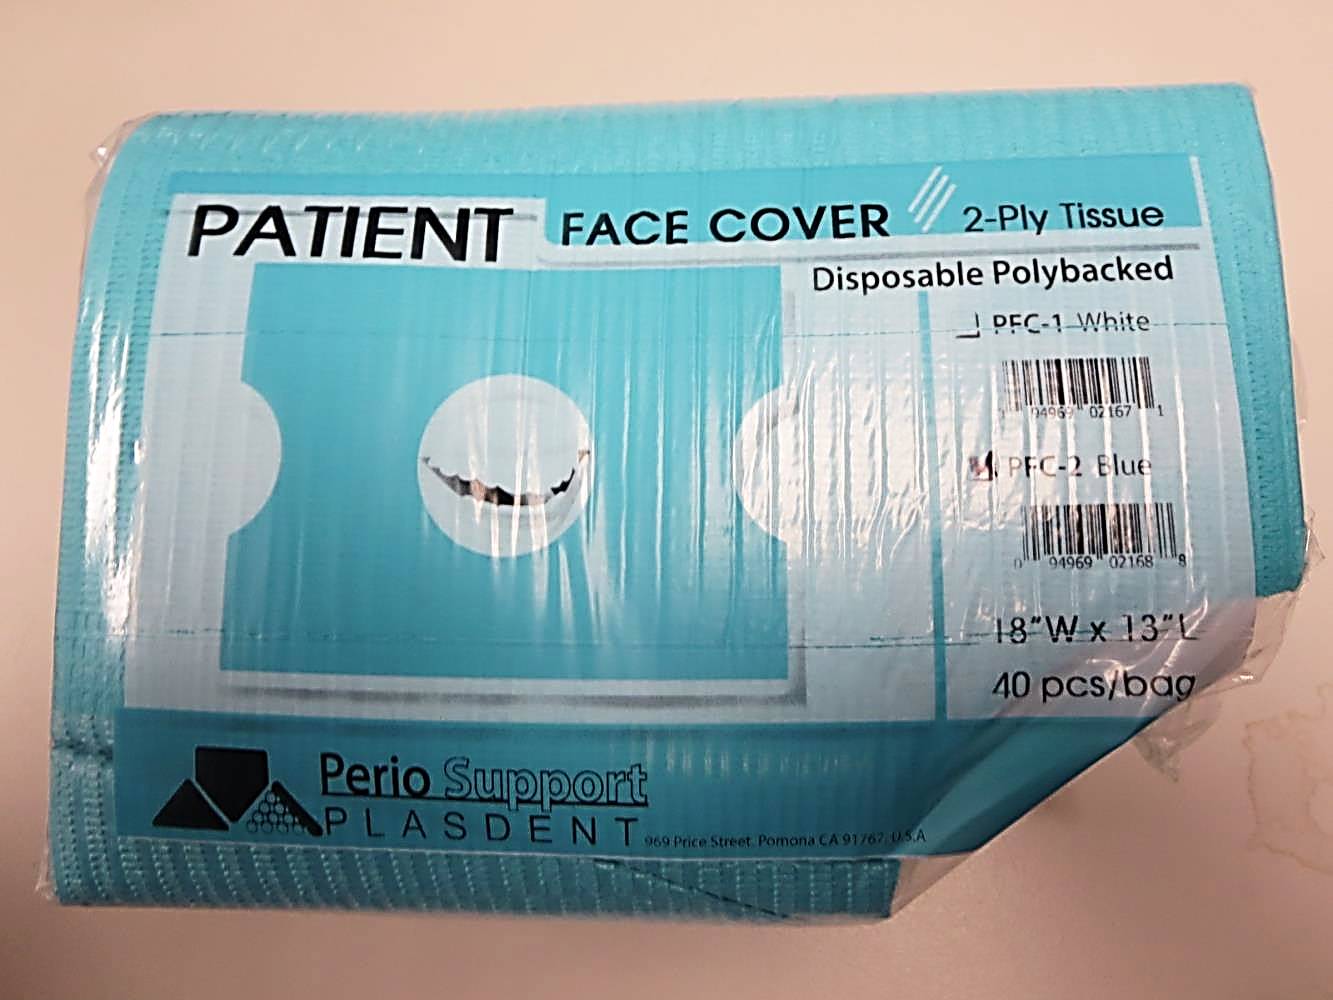 PFC Plasdent Patient Polybacked Face Cover, 18-in x 13-in 